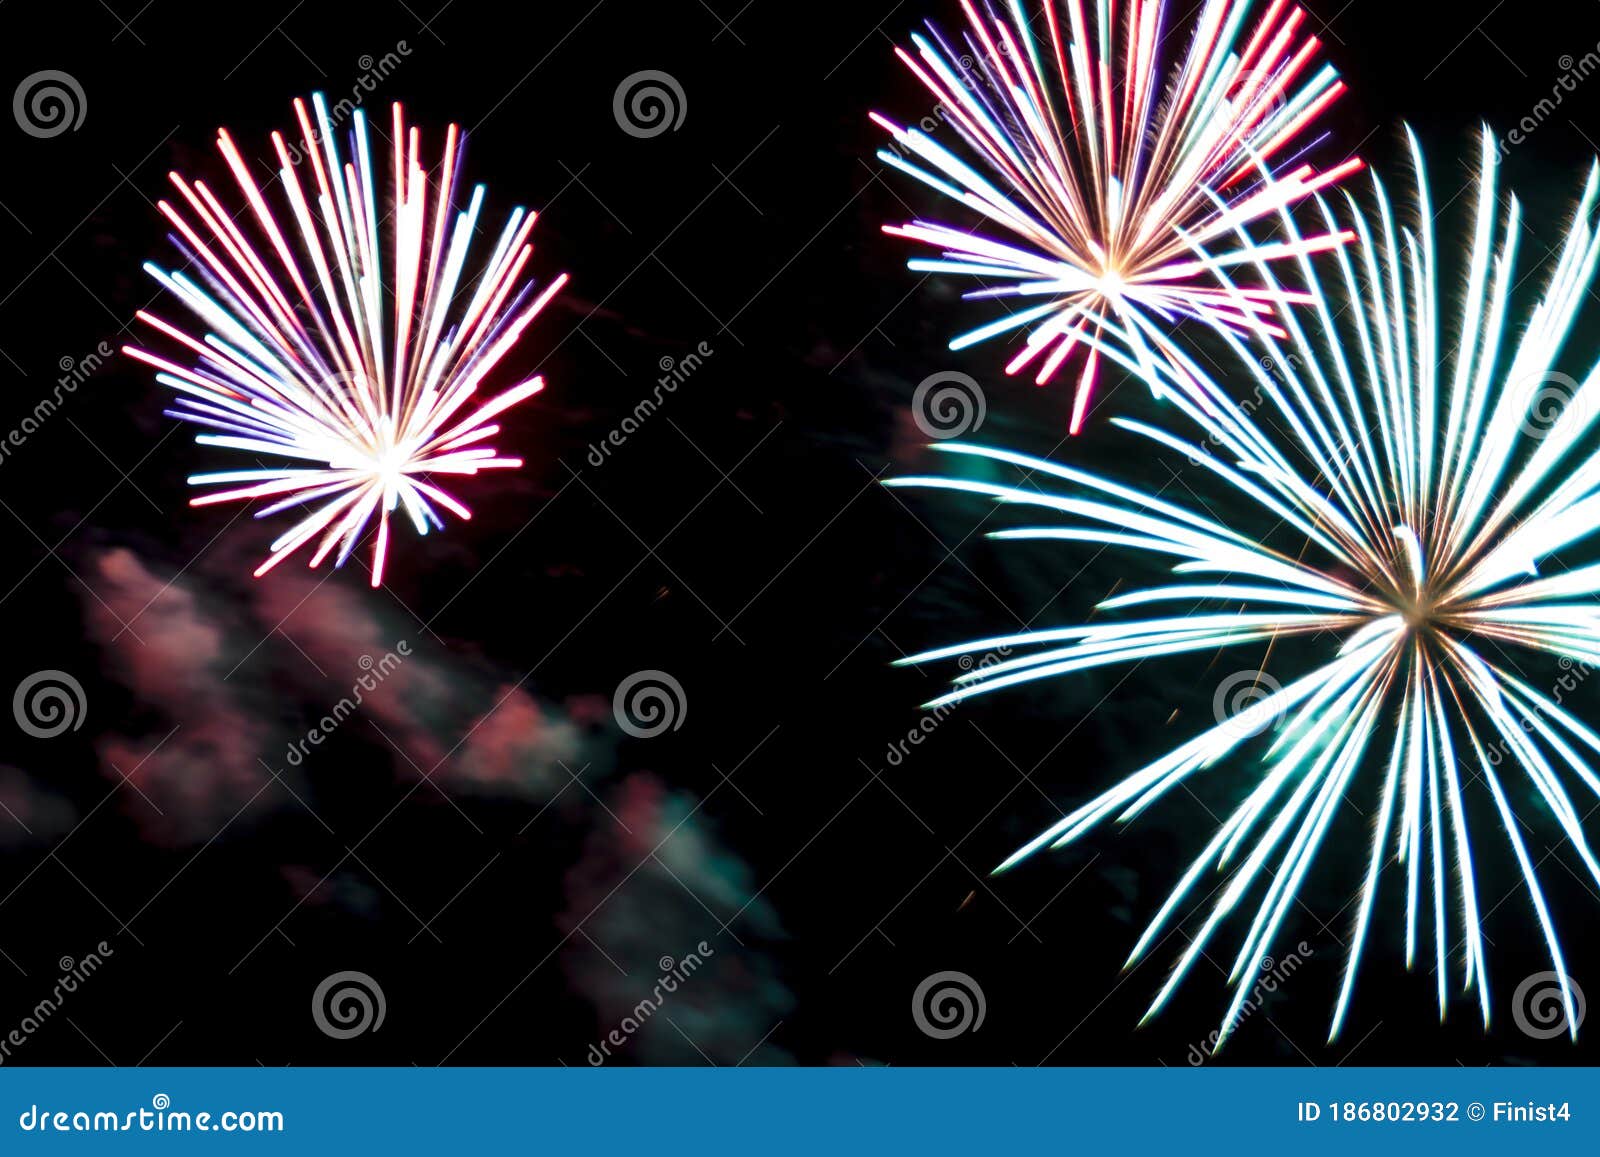 Colorful Fireworks In The Night Sky In The Form Of Flowers Stock Photo